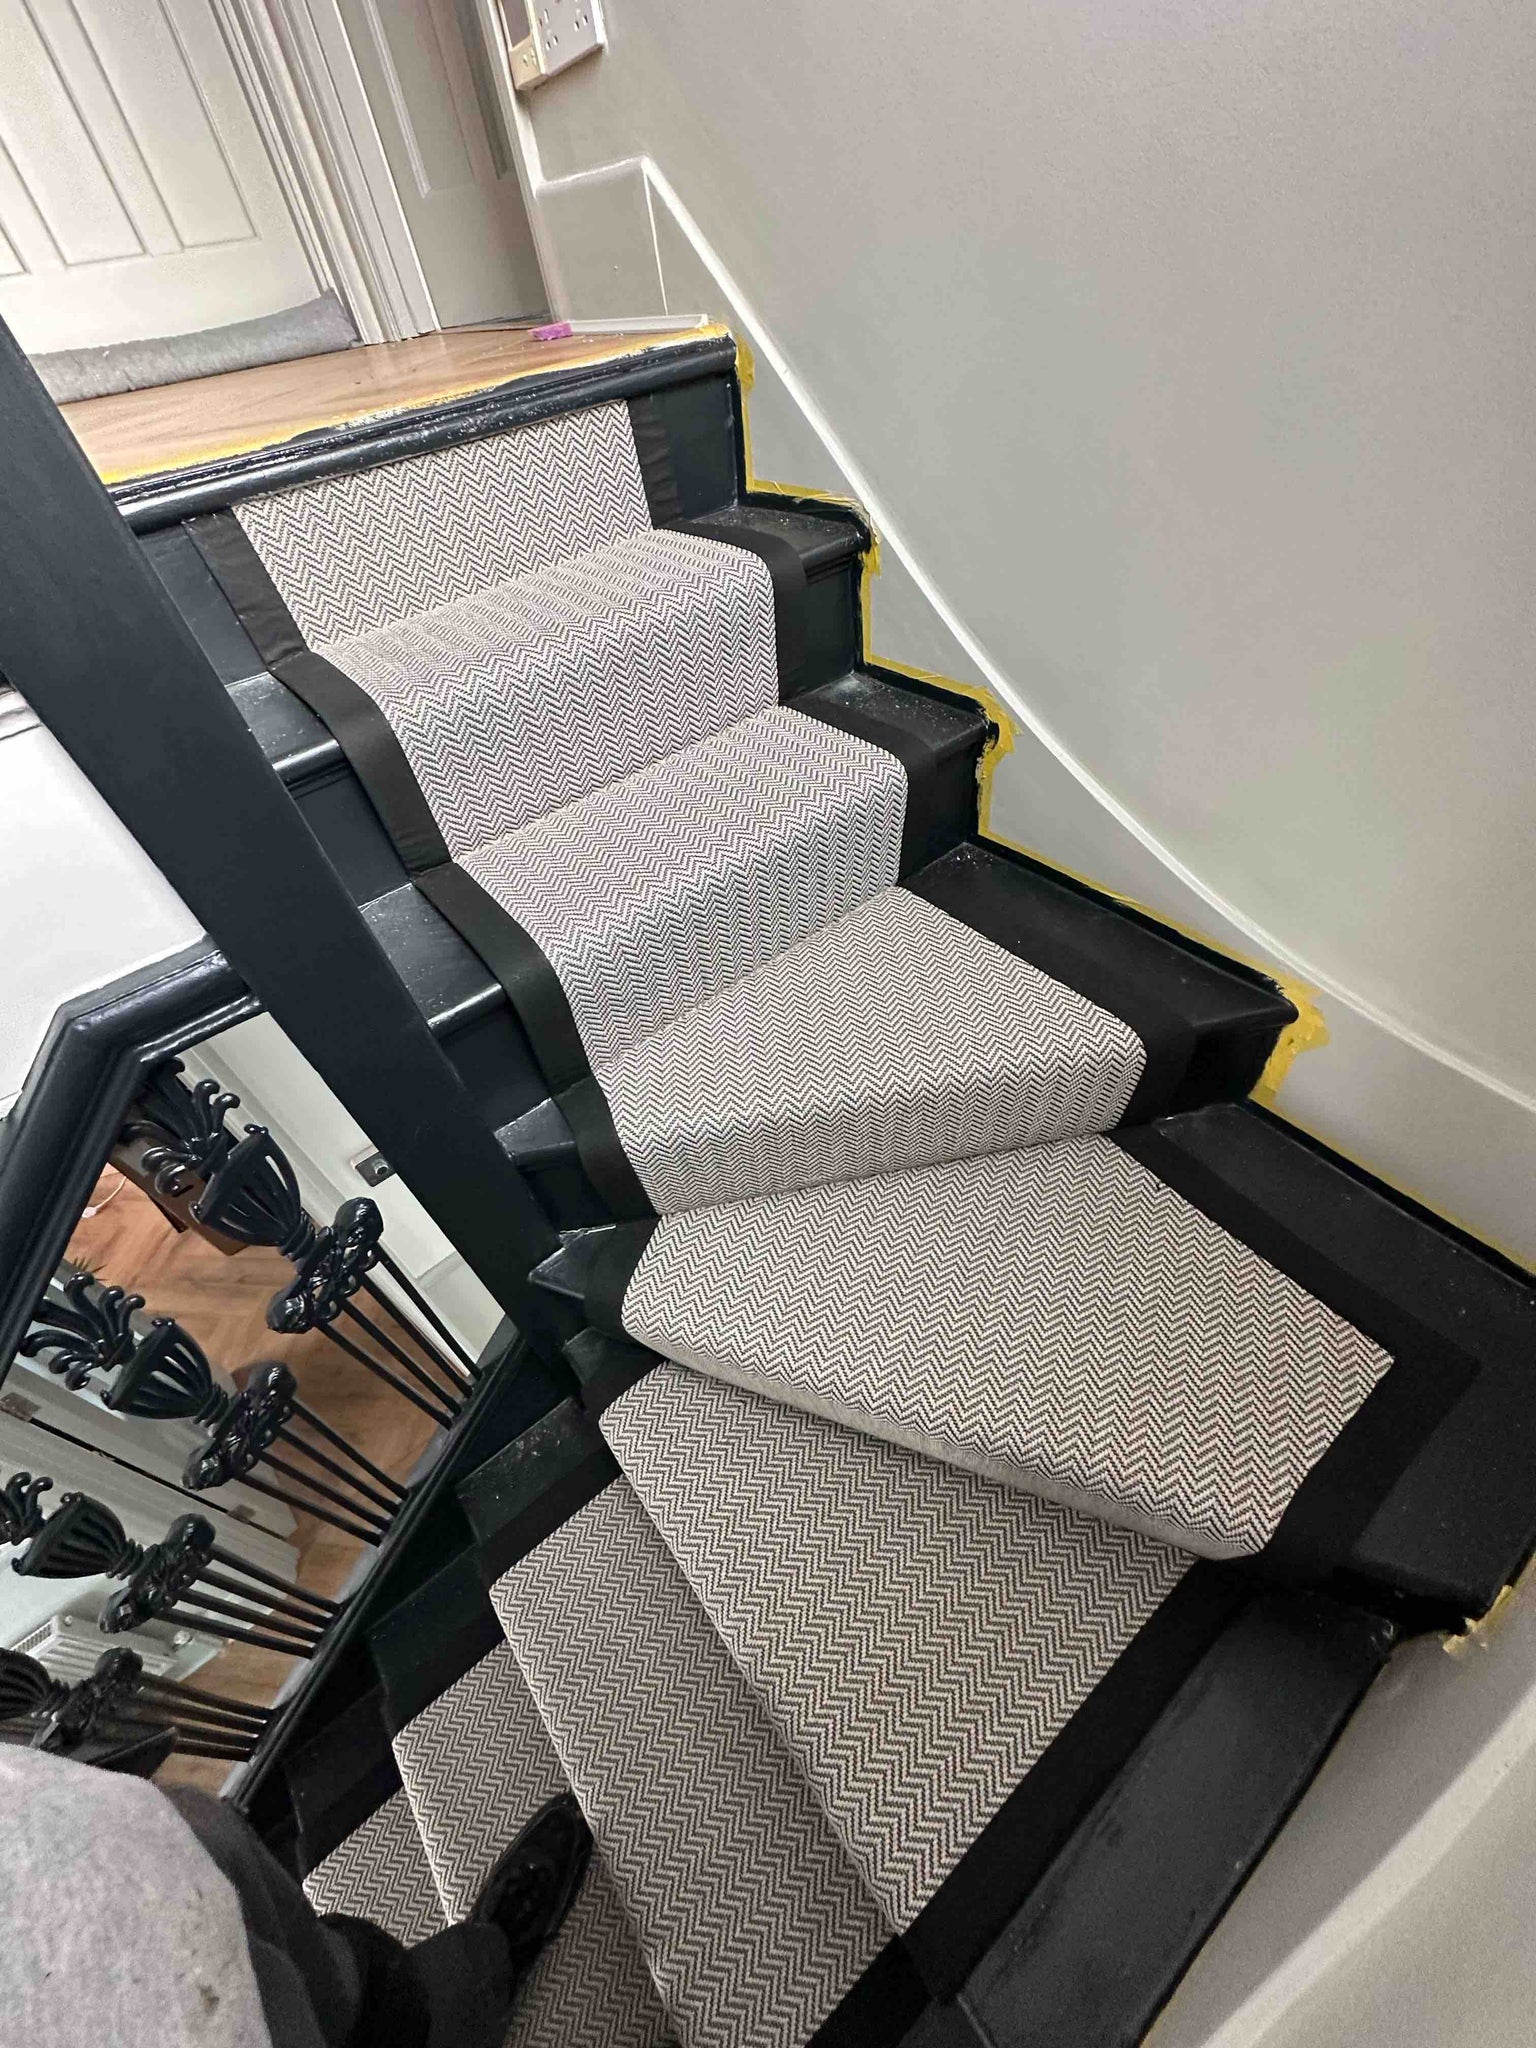 How the black and white herringbone patterned looks when it is fitted to winding stairs